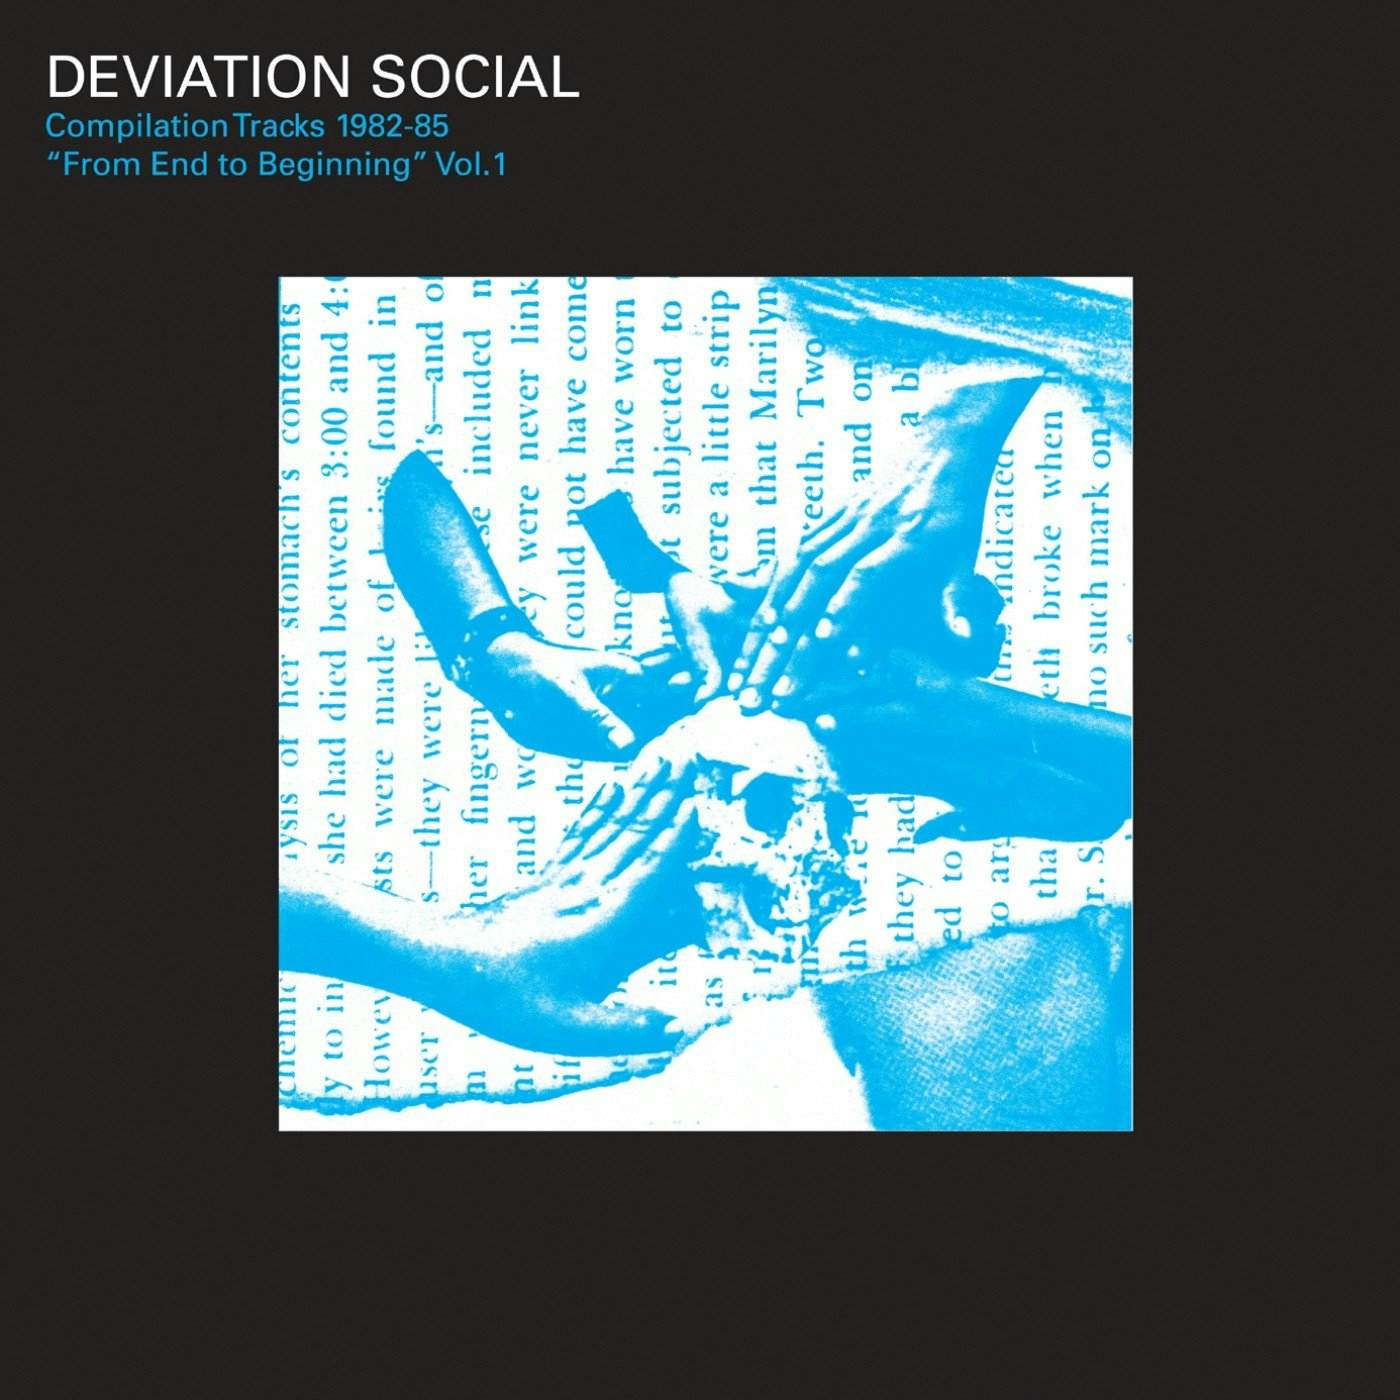 Deviation Social COMPILATION TRACKS 1982-85 FROM END TO VOL. 1 Vinyl Record